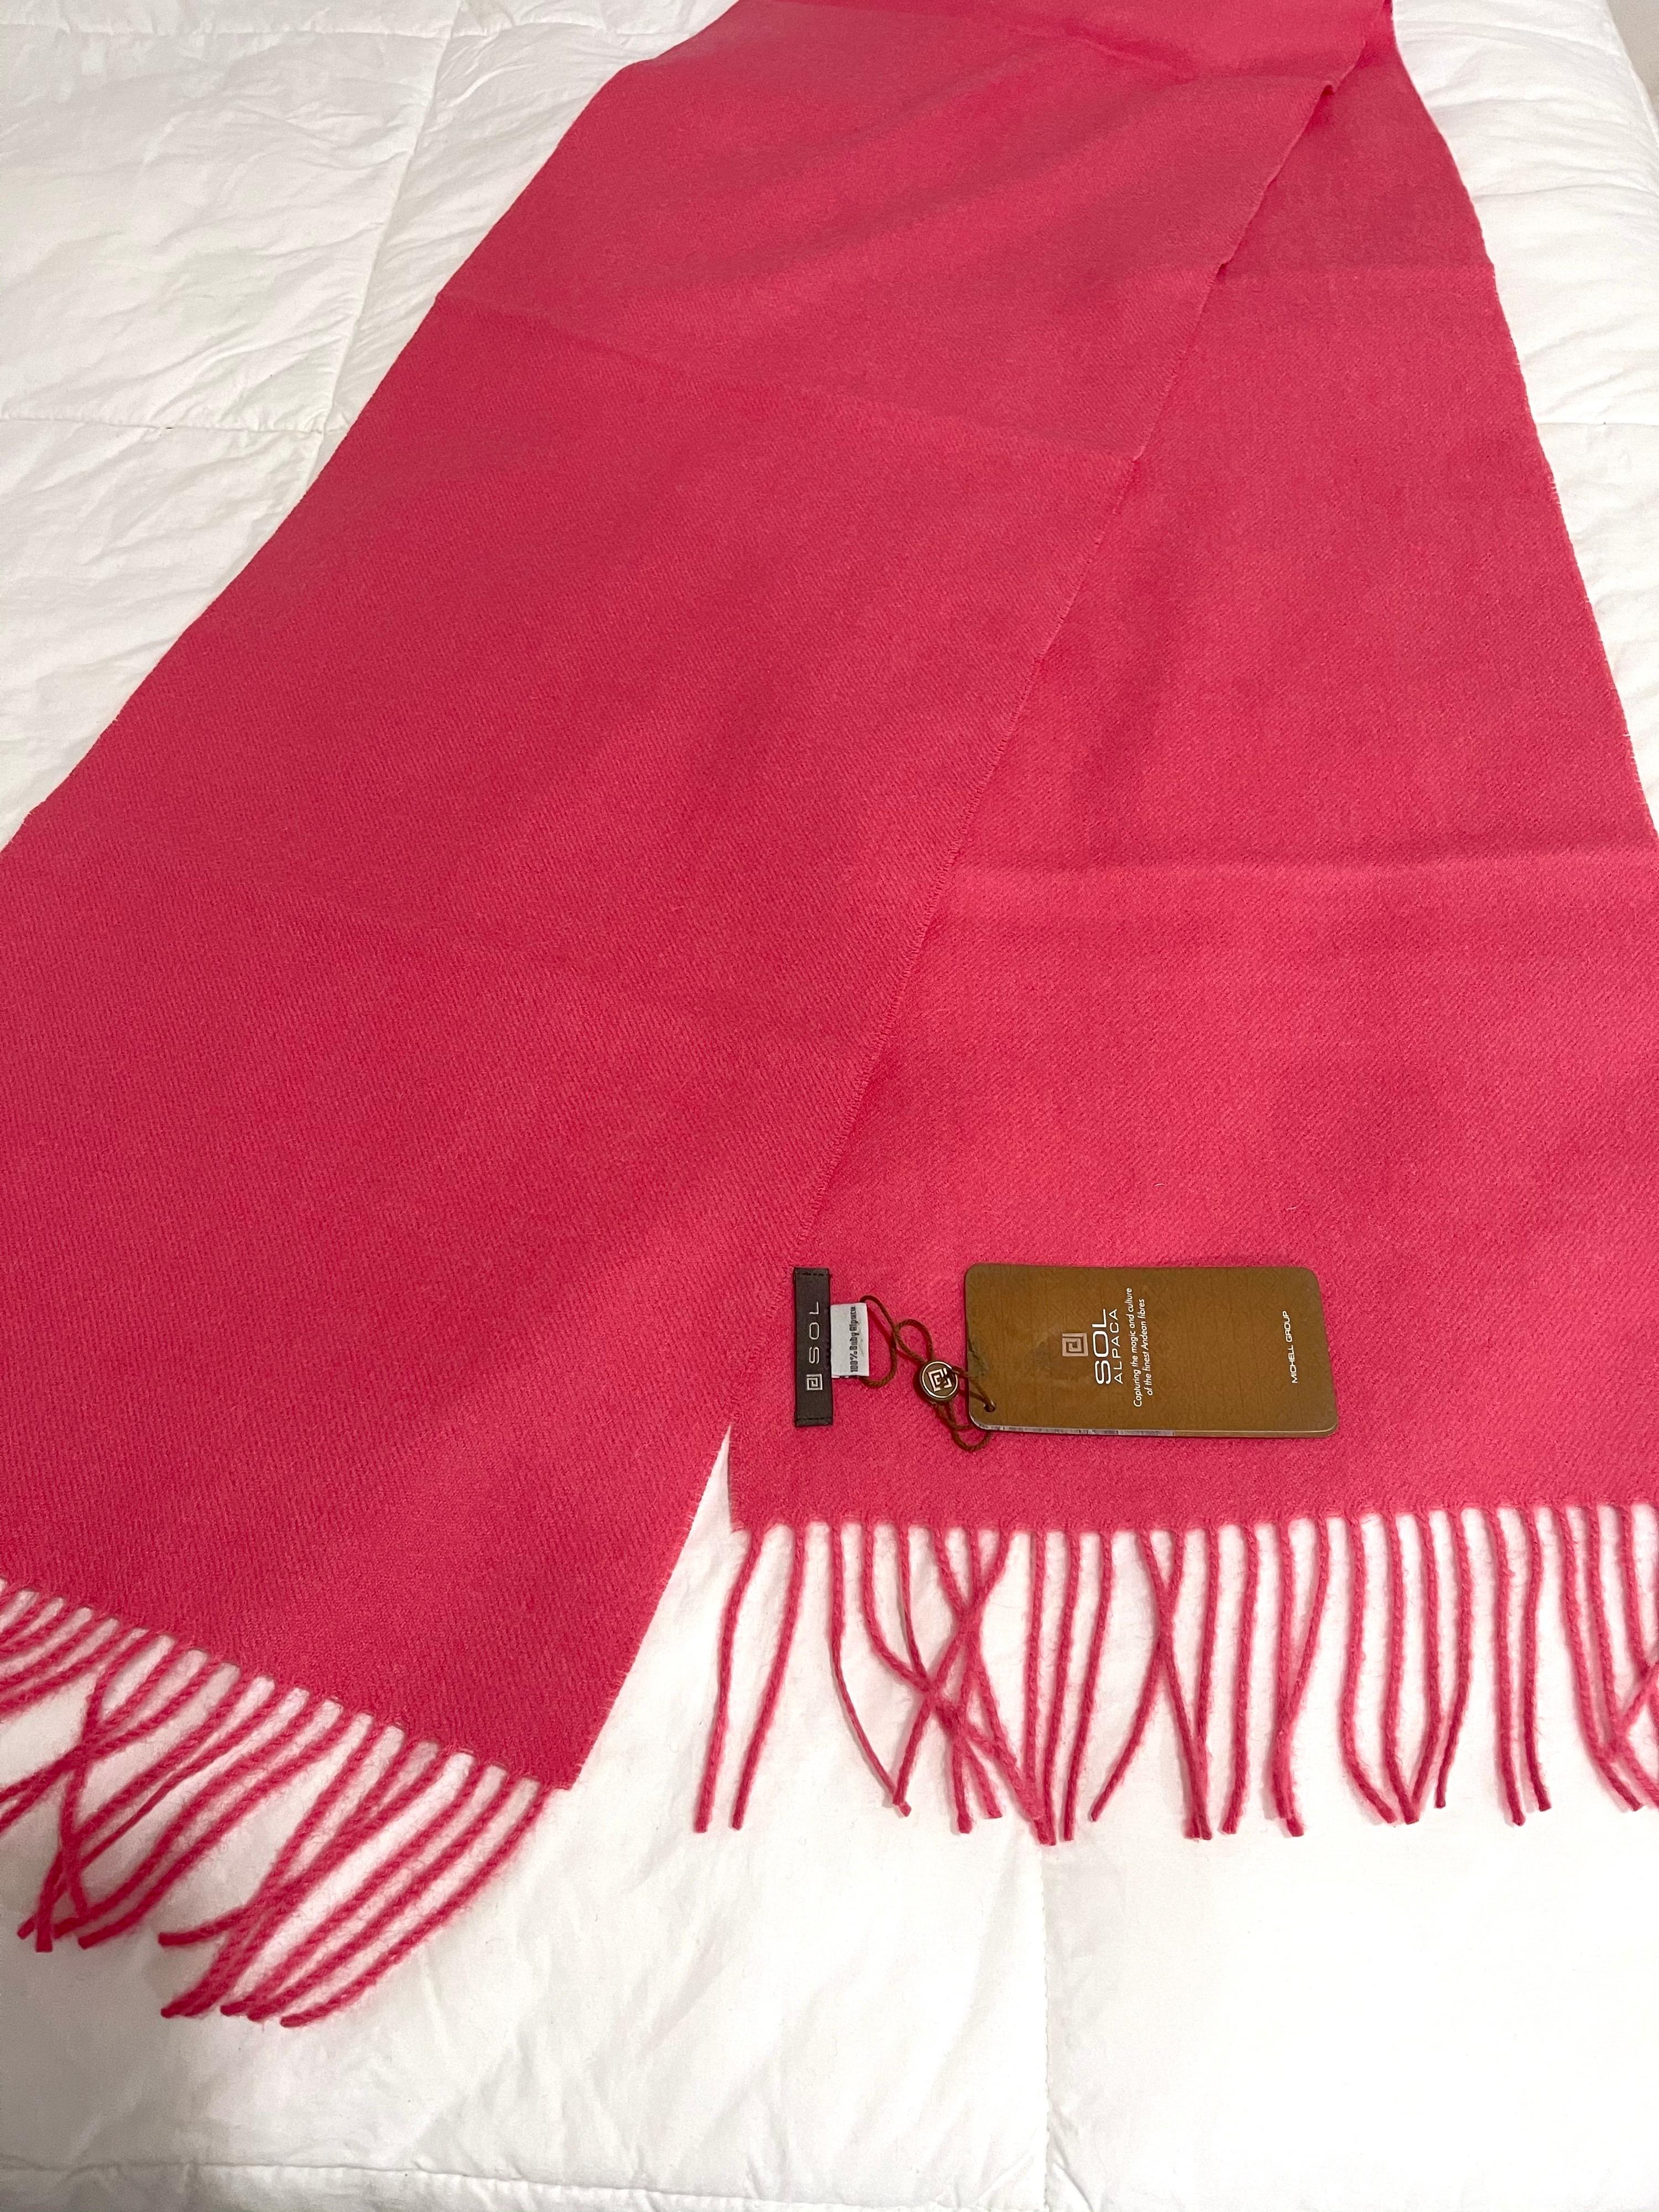 Made in Peru
Description

Pattern Type: Plain
Department Name: Adult
Scarves Type: Stole
Style: Fashion
Gender : Women
Material: 100% Alpaca

Shawl  Length: 67Inches 
Shawl Width : 12 Inches
Color: Hot Pink
suitable for season: autumn, winter
Comes